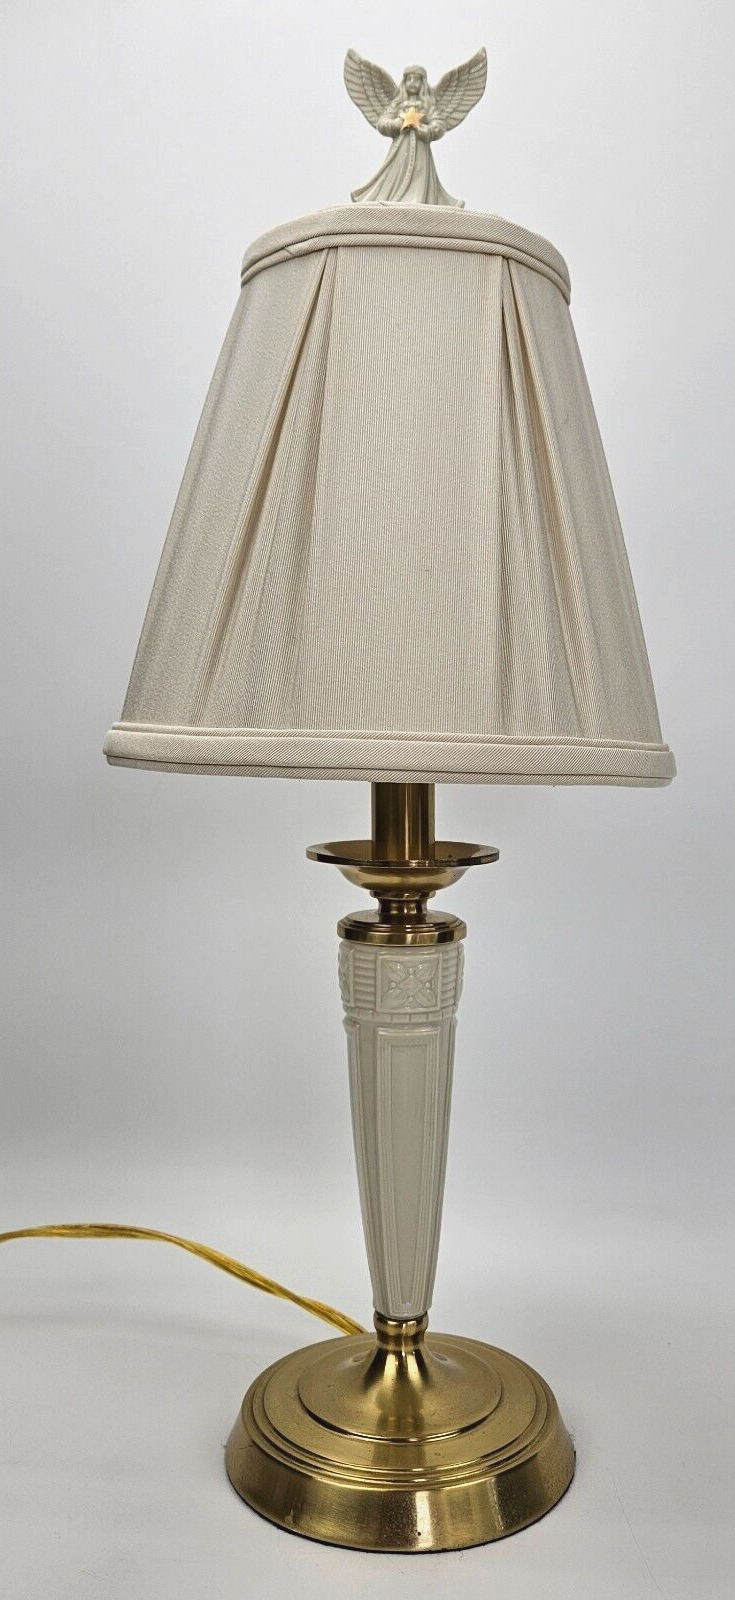 Quoizel Lenox Brass Table Lamp with Original Shade Vintage Porcelain Angel Toppe